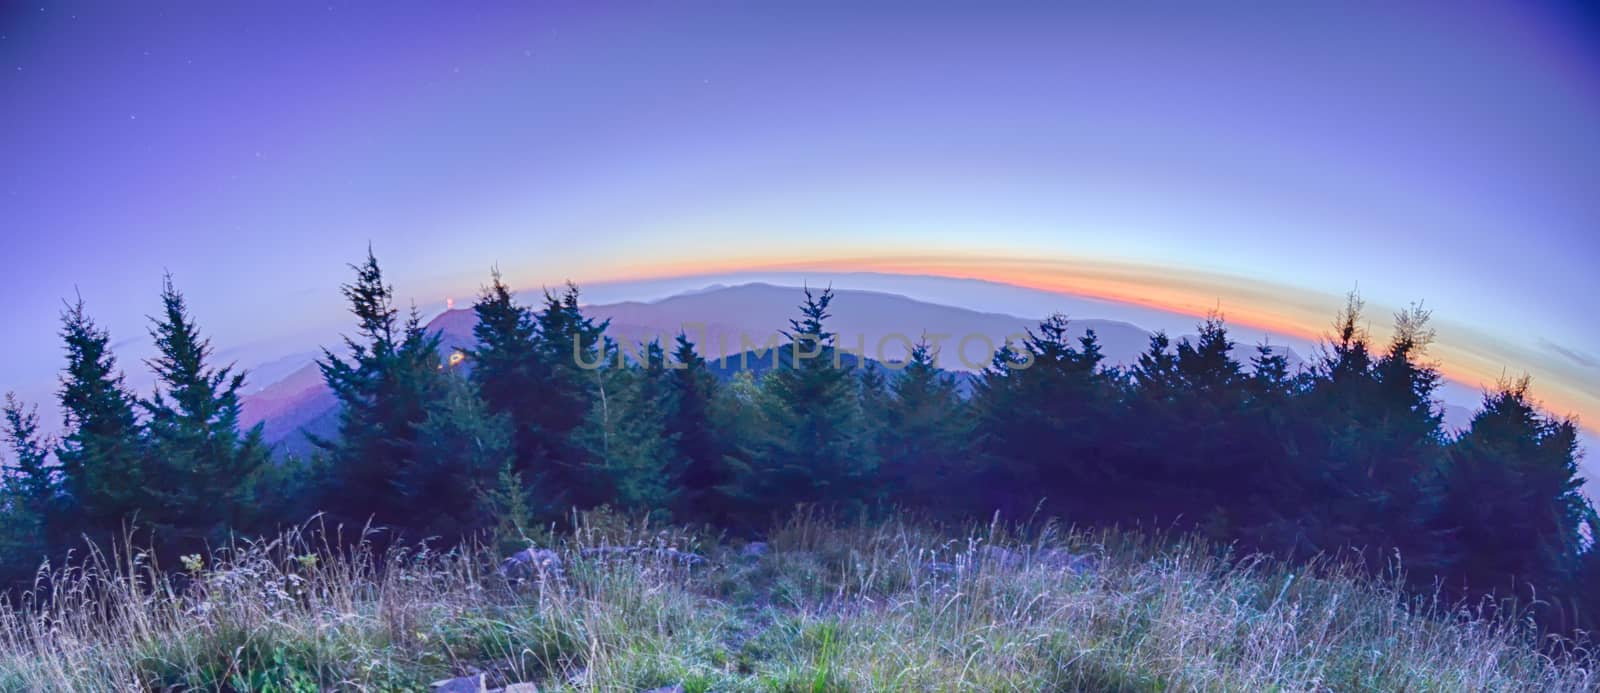 top of mount mitchell before sunset by digidreamgrafix